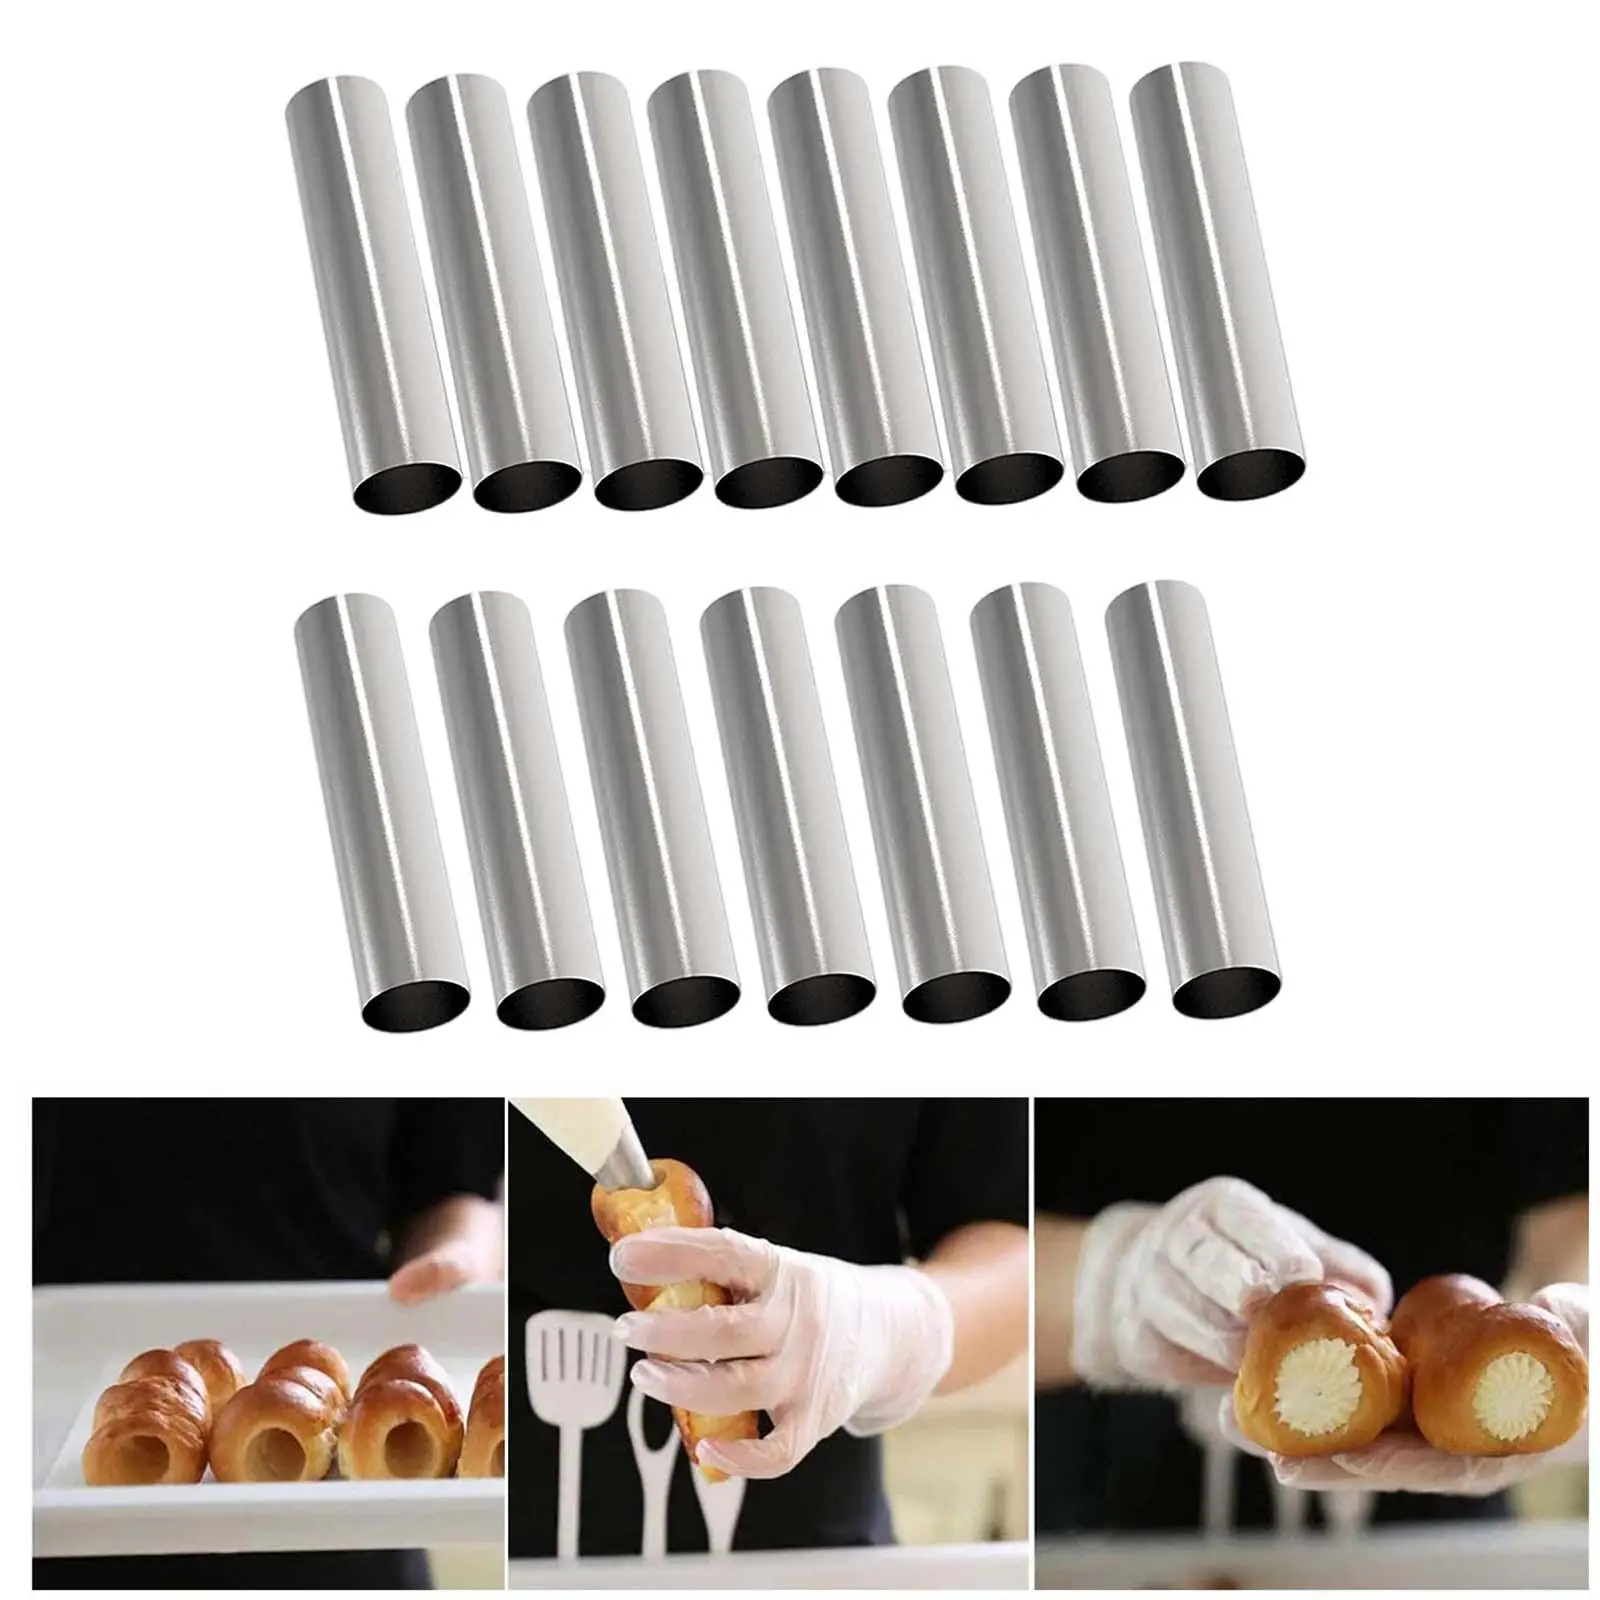 15x Food Grade Cannoli Form Tubes for Chocolate Cones Making Butter